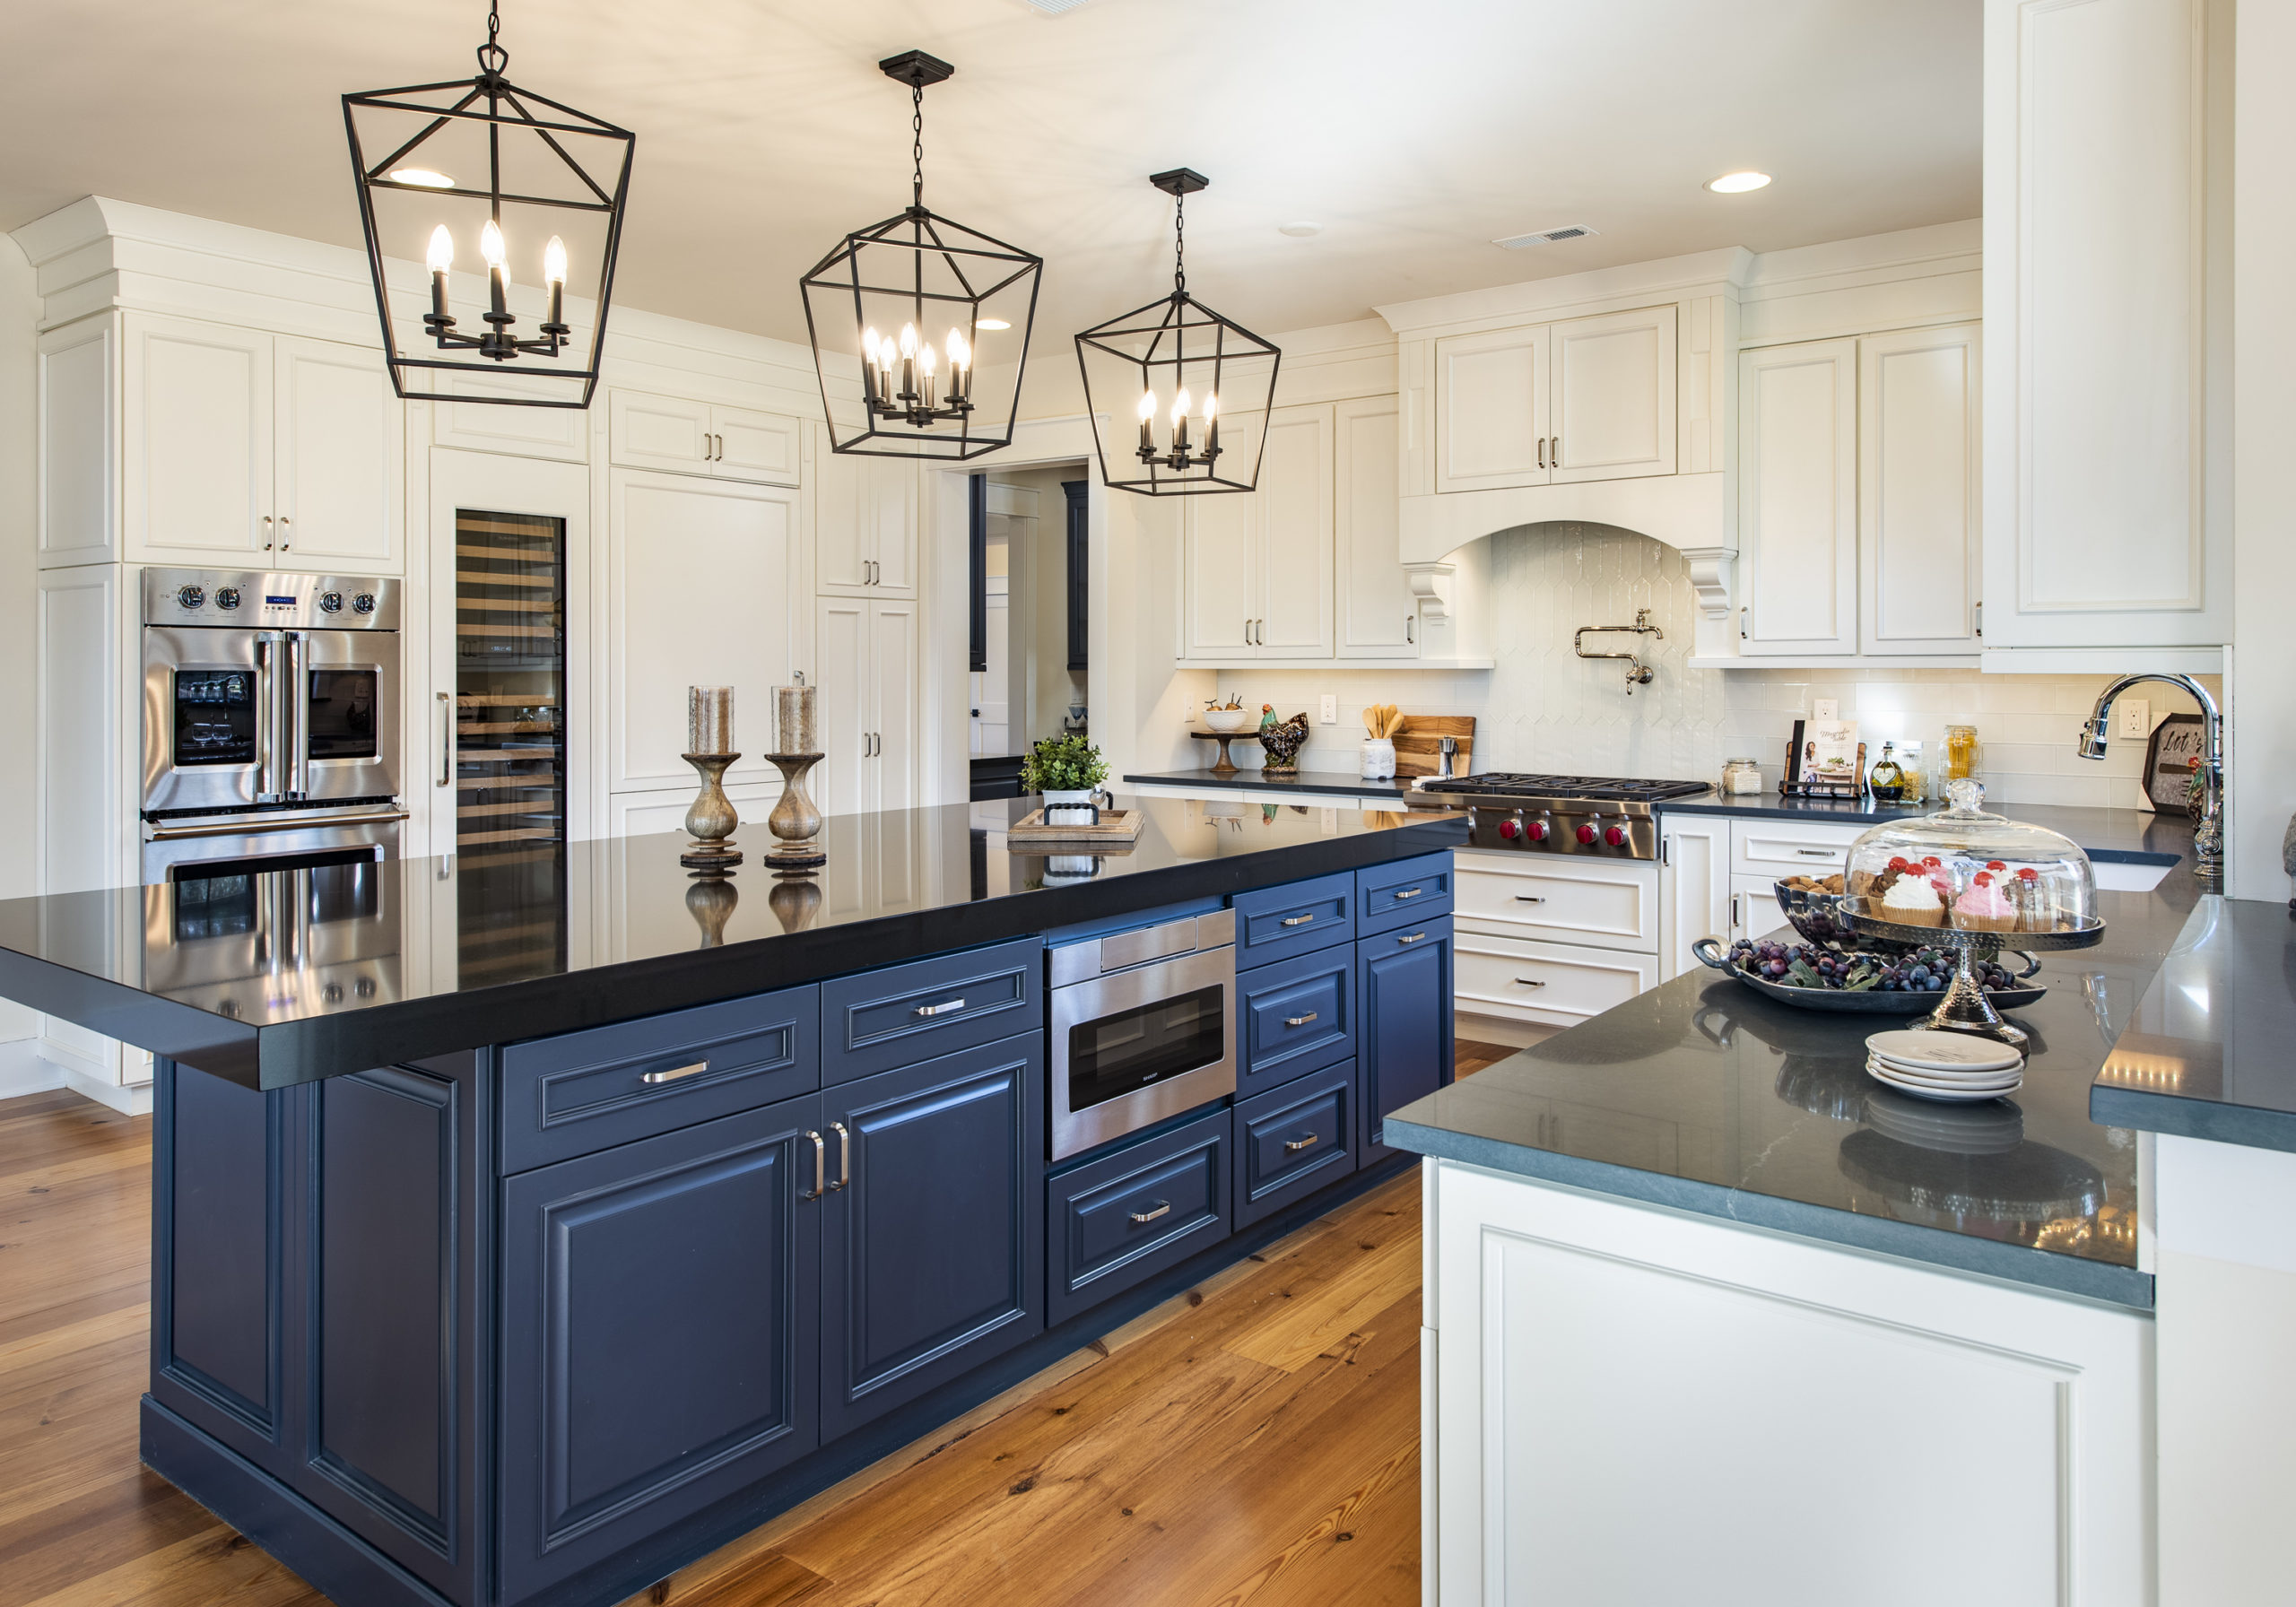 20 Kitchen Design Trends   PA New Homes   DeLuca Homes